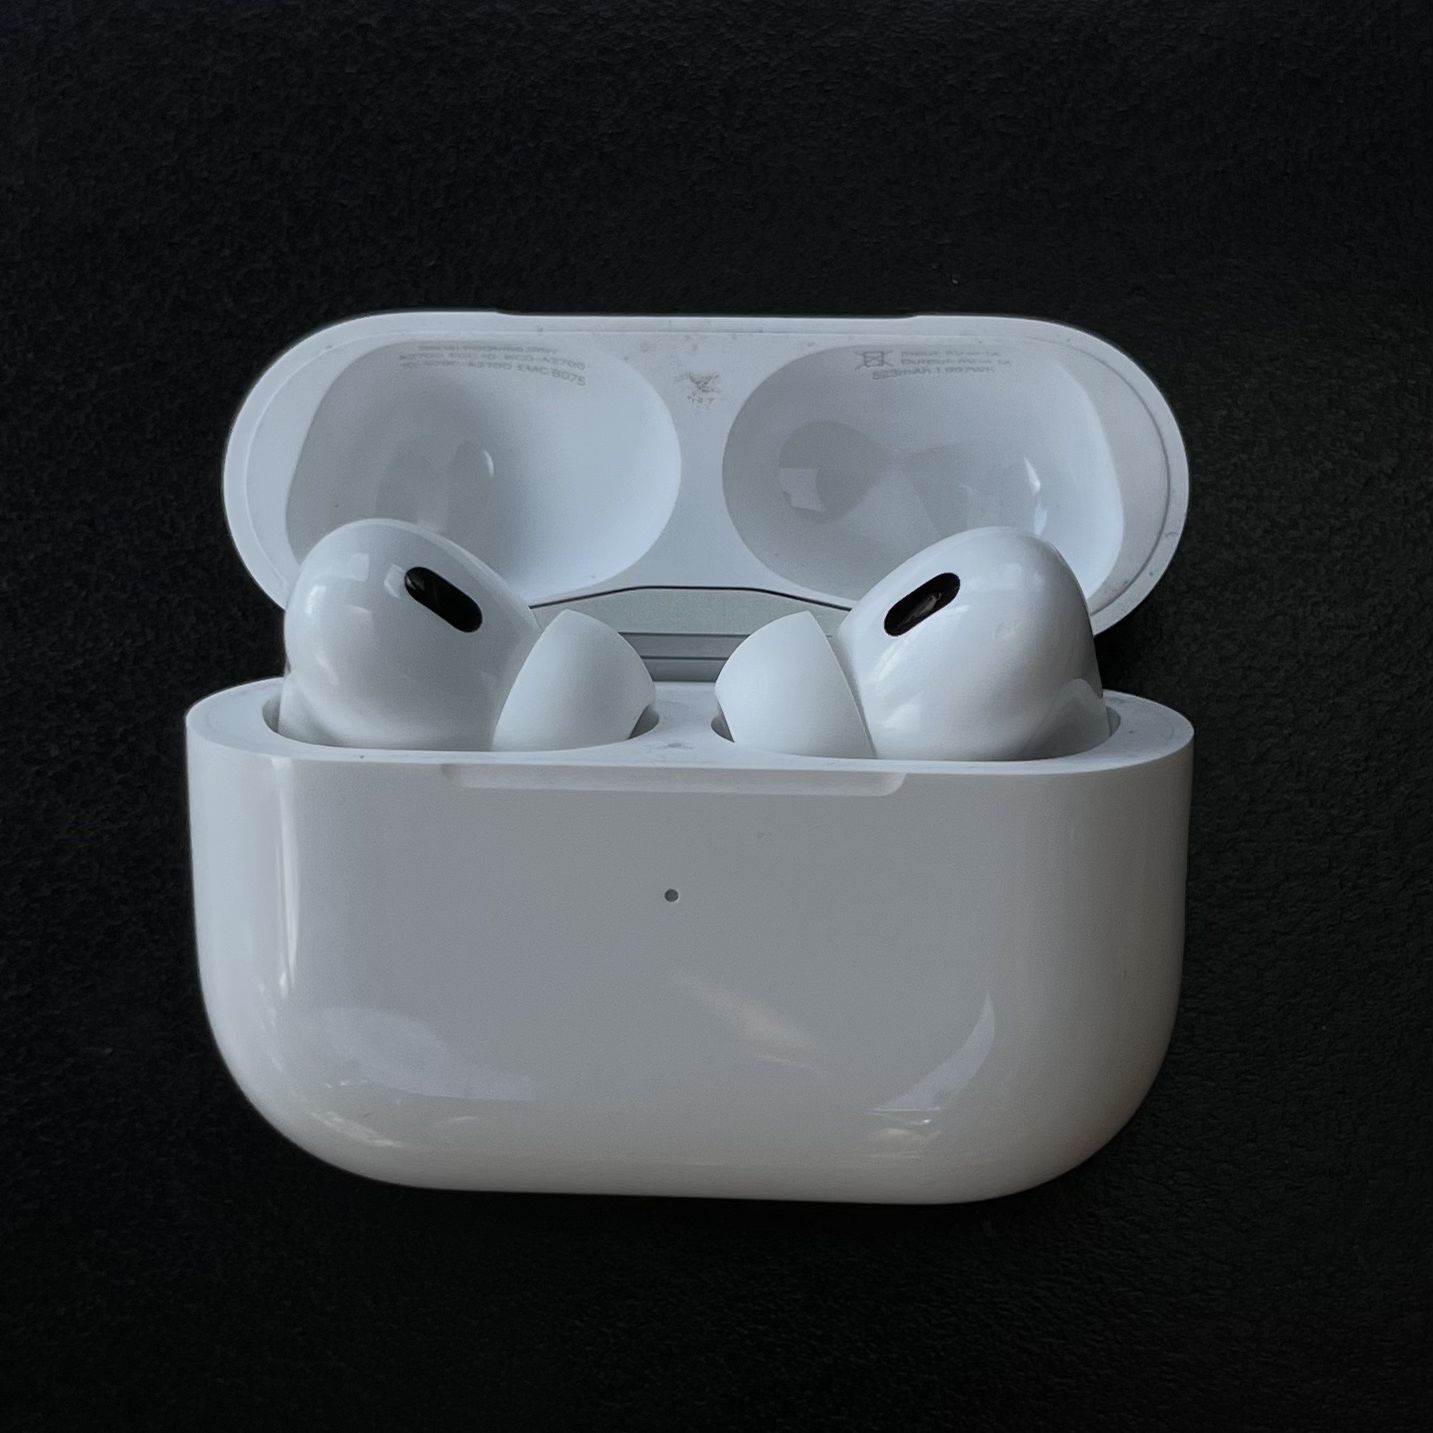 AirPod Pro 2nd Generation With MagSafe Wireless Charging Case